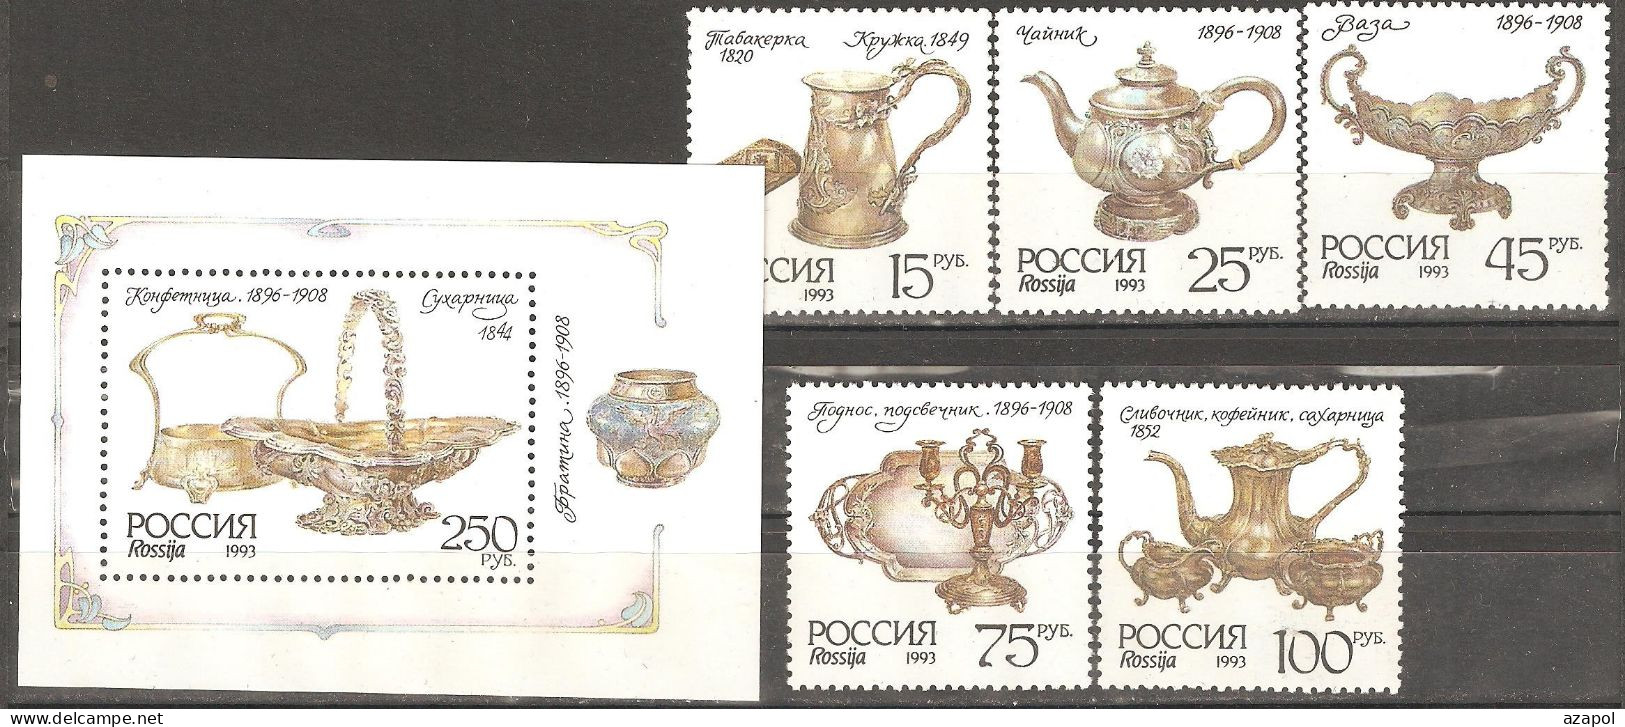 Russian Silverware: Full Set Of 5 Mint Stamps And Block, Russia, 1992, Mi#308-311, Bl-5, MNH - Museums